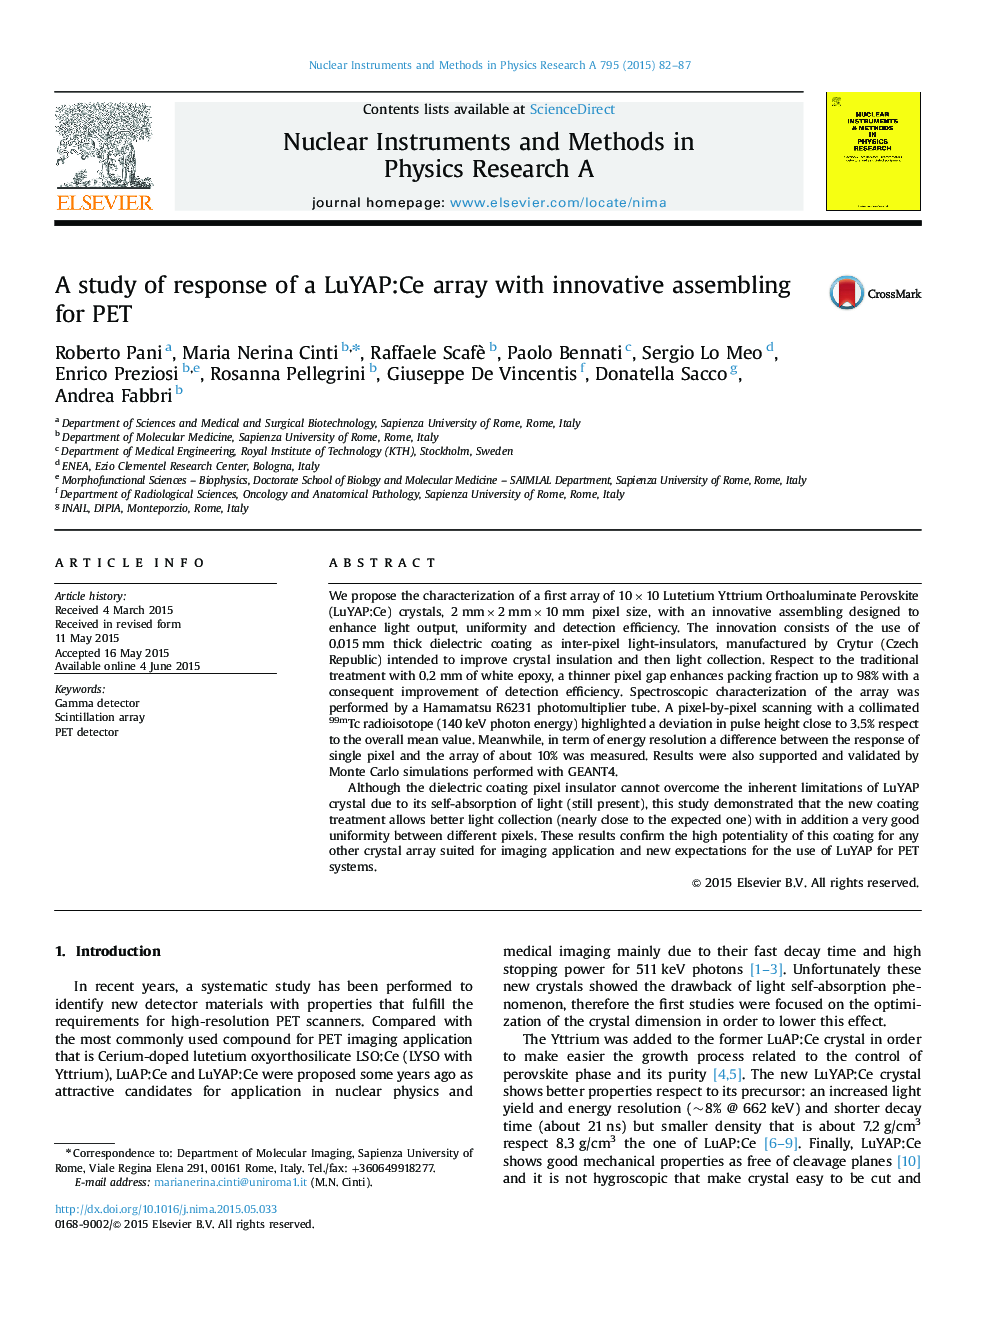 A study of response of a LuYAP:Ce array with innovative assembling for PET